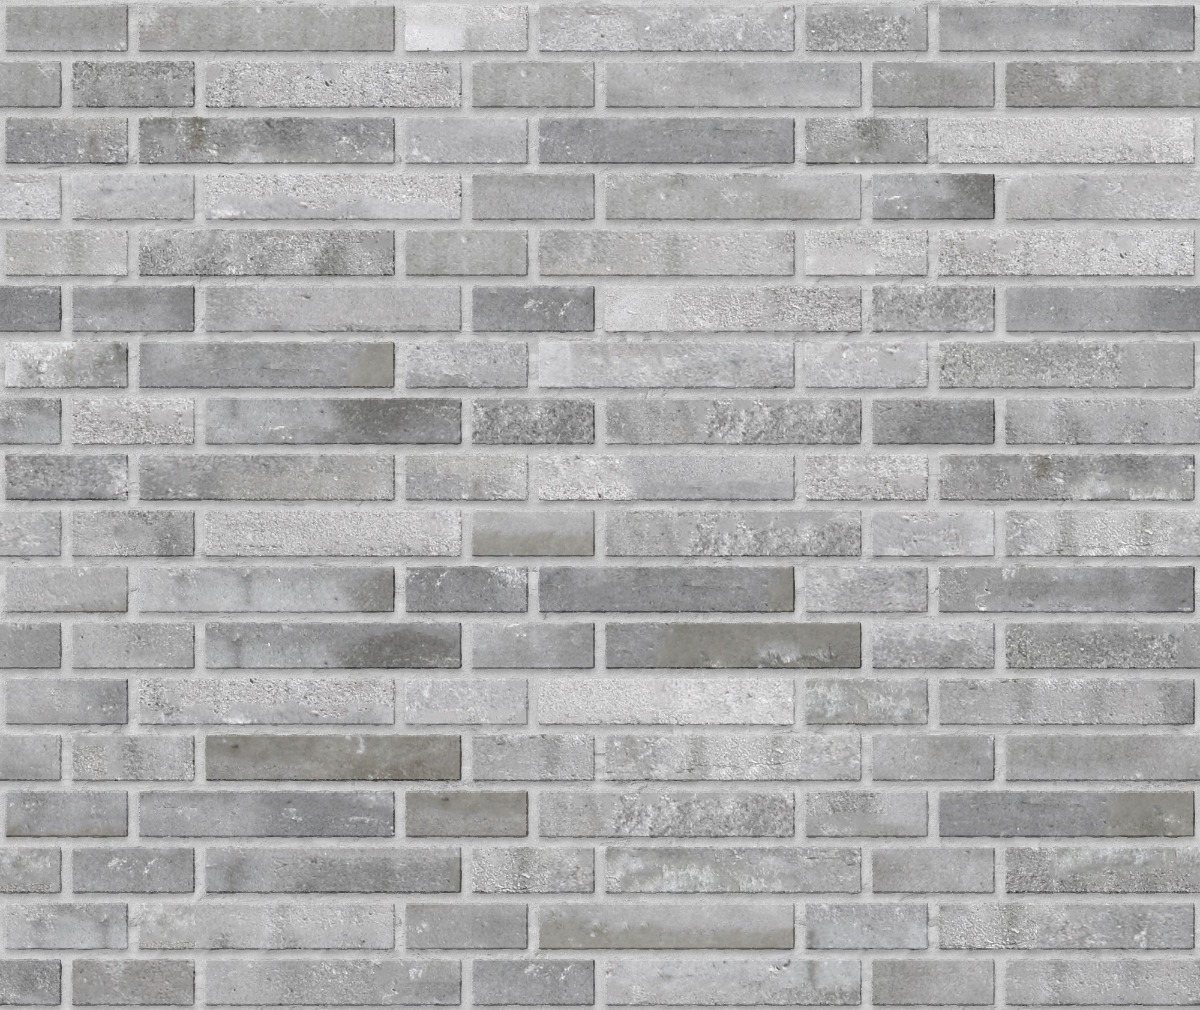 A seamless brick texture with finnish grey brick units arranged in a Gothic Bond pattern